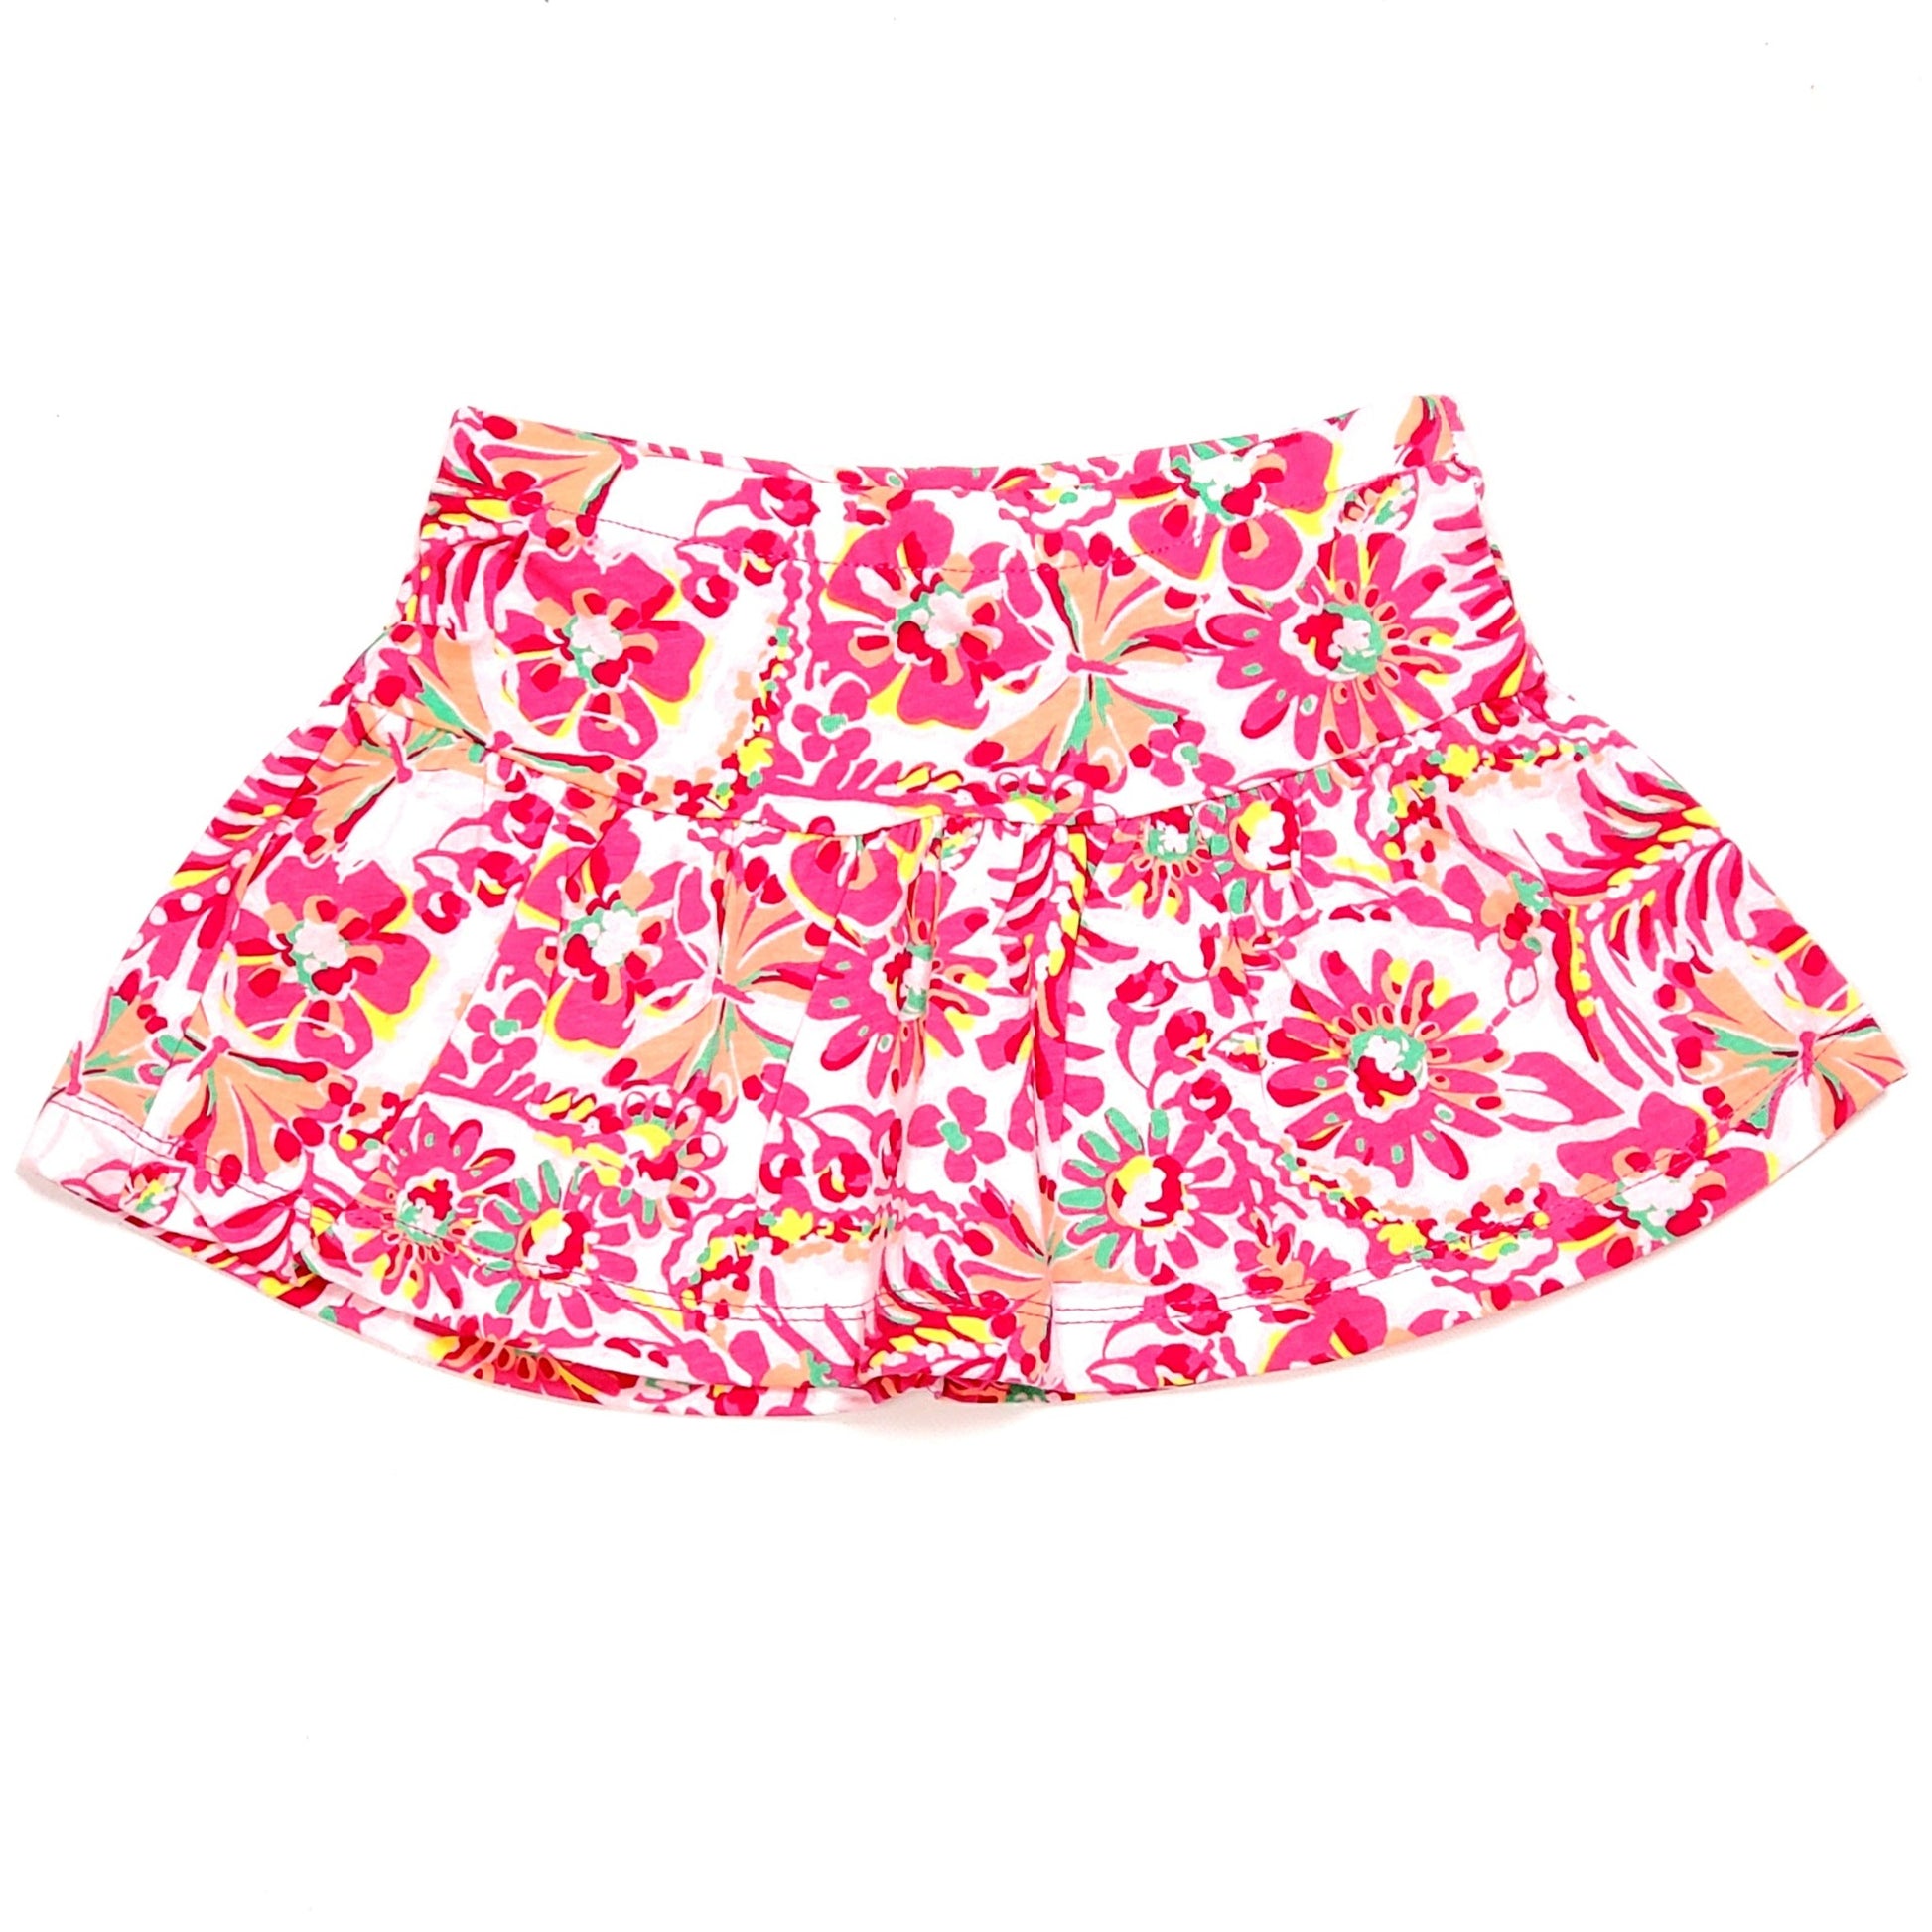 Childrens Place Girls Skort 2T Pink Floral Print Used View 1